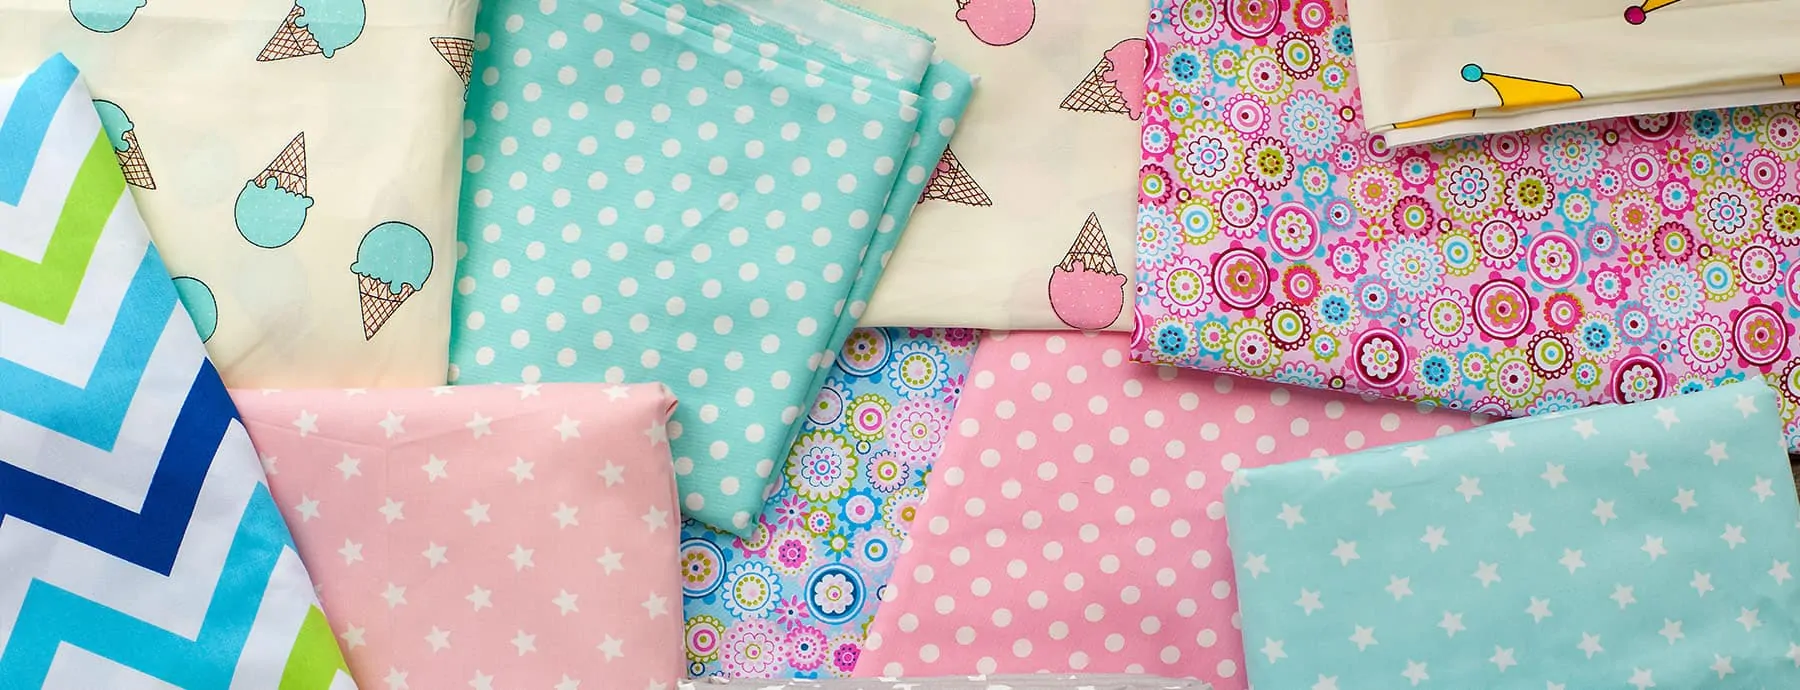 Sewing Fabric Online